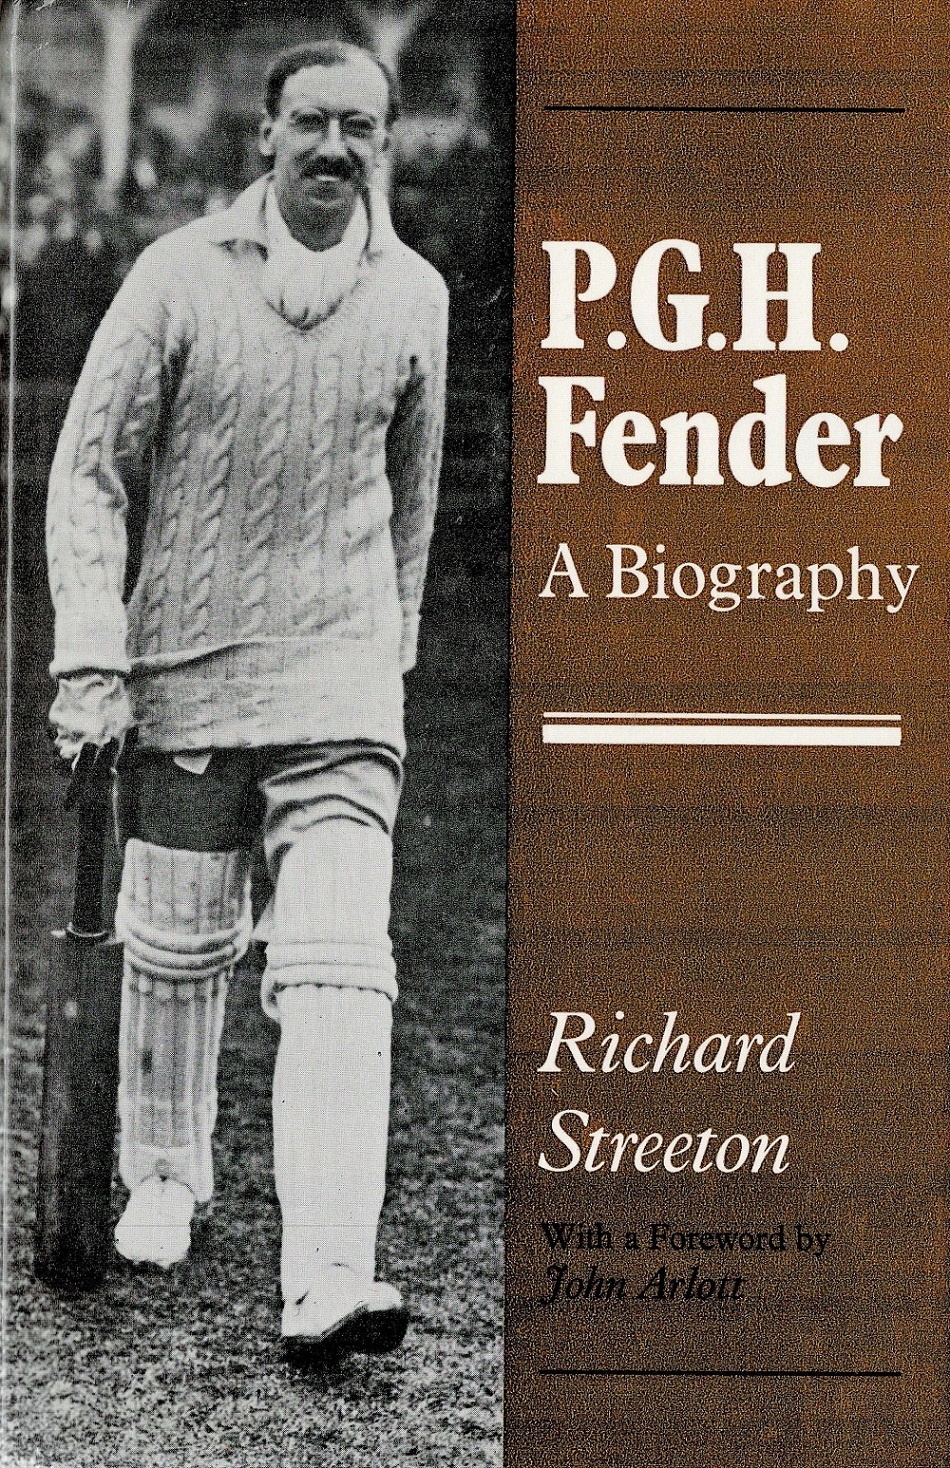 Signed Book P G H Fender A Biography by Richard Streeton First Edition 1981 Hardback Book with A